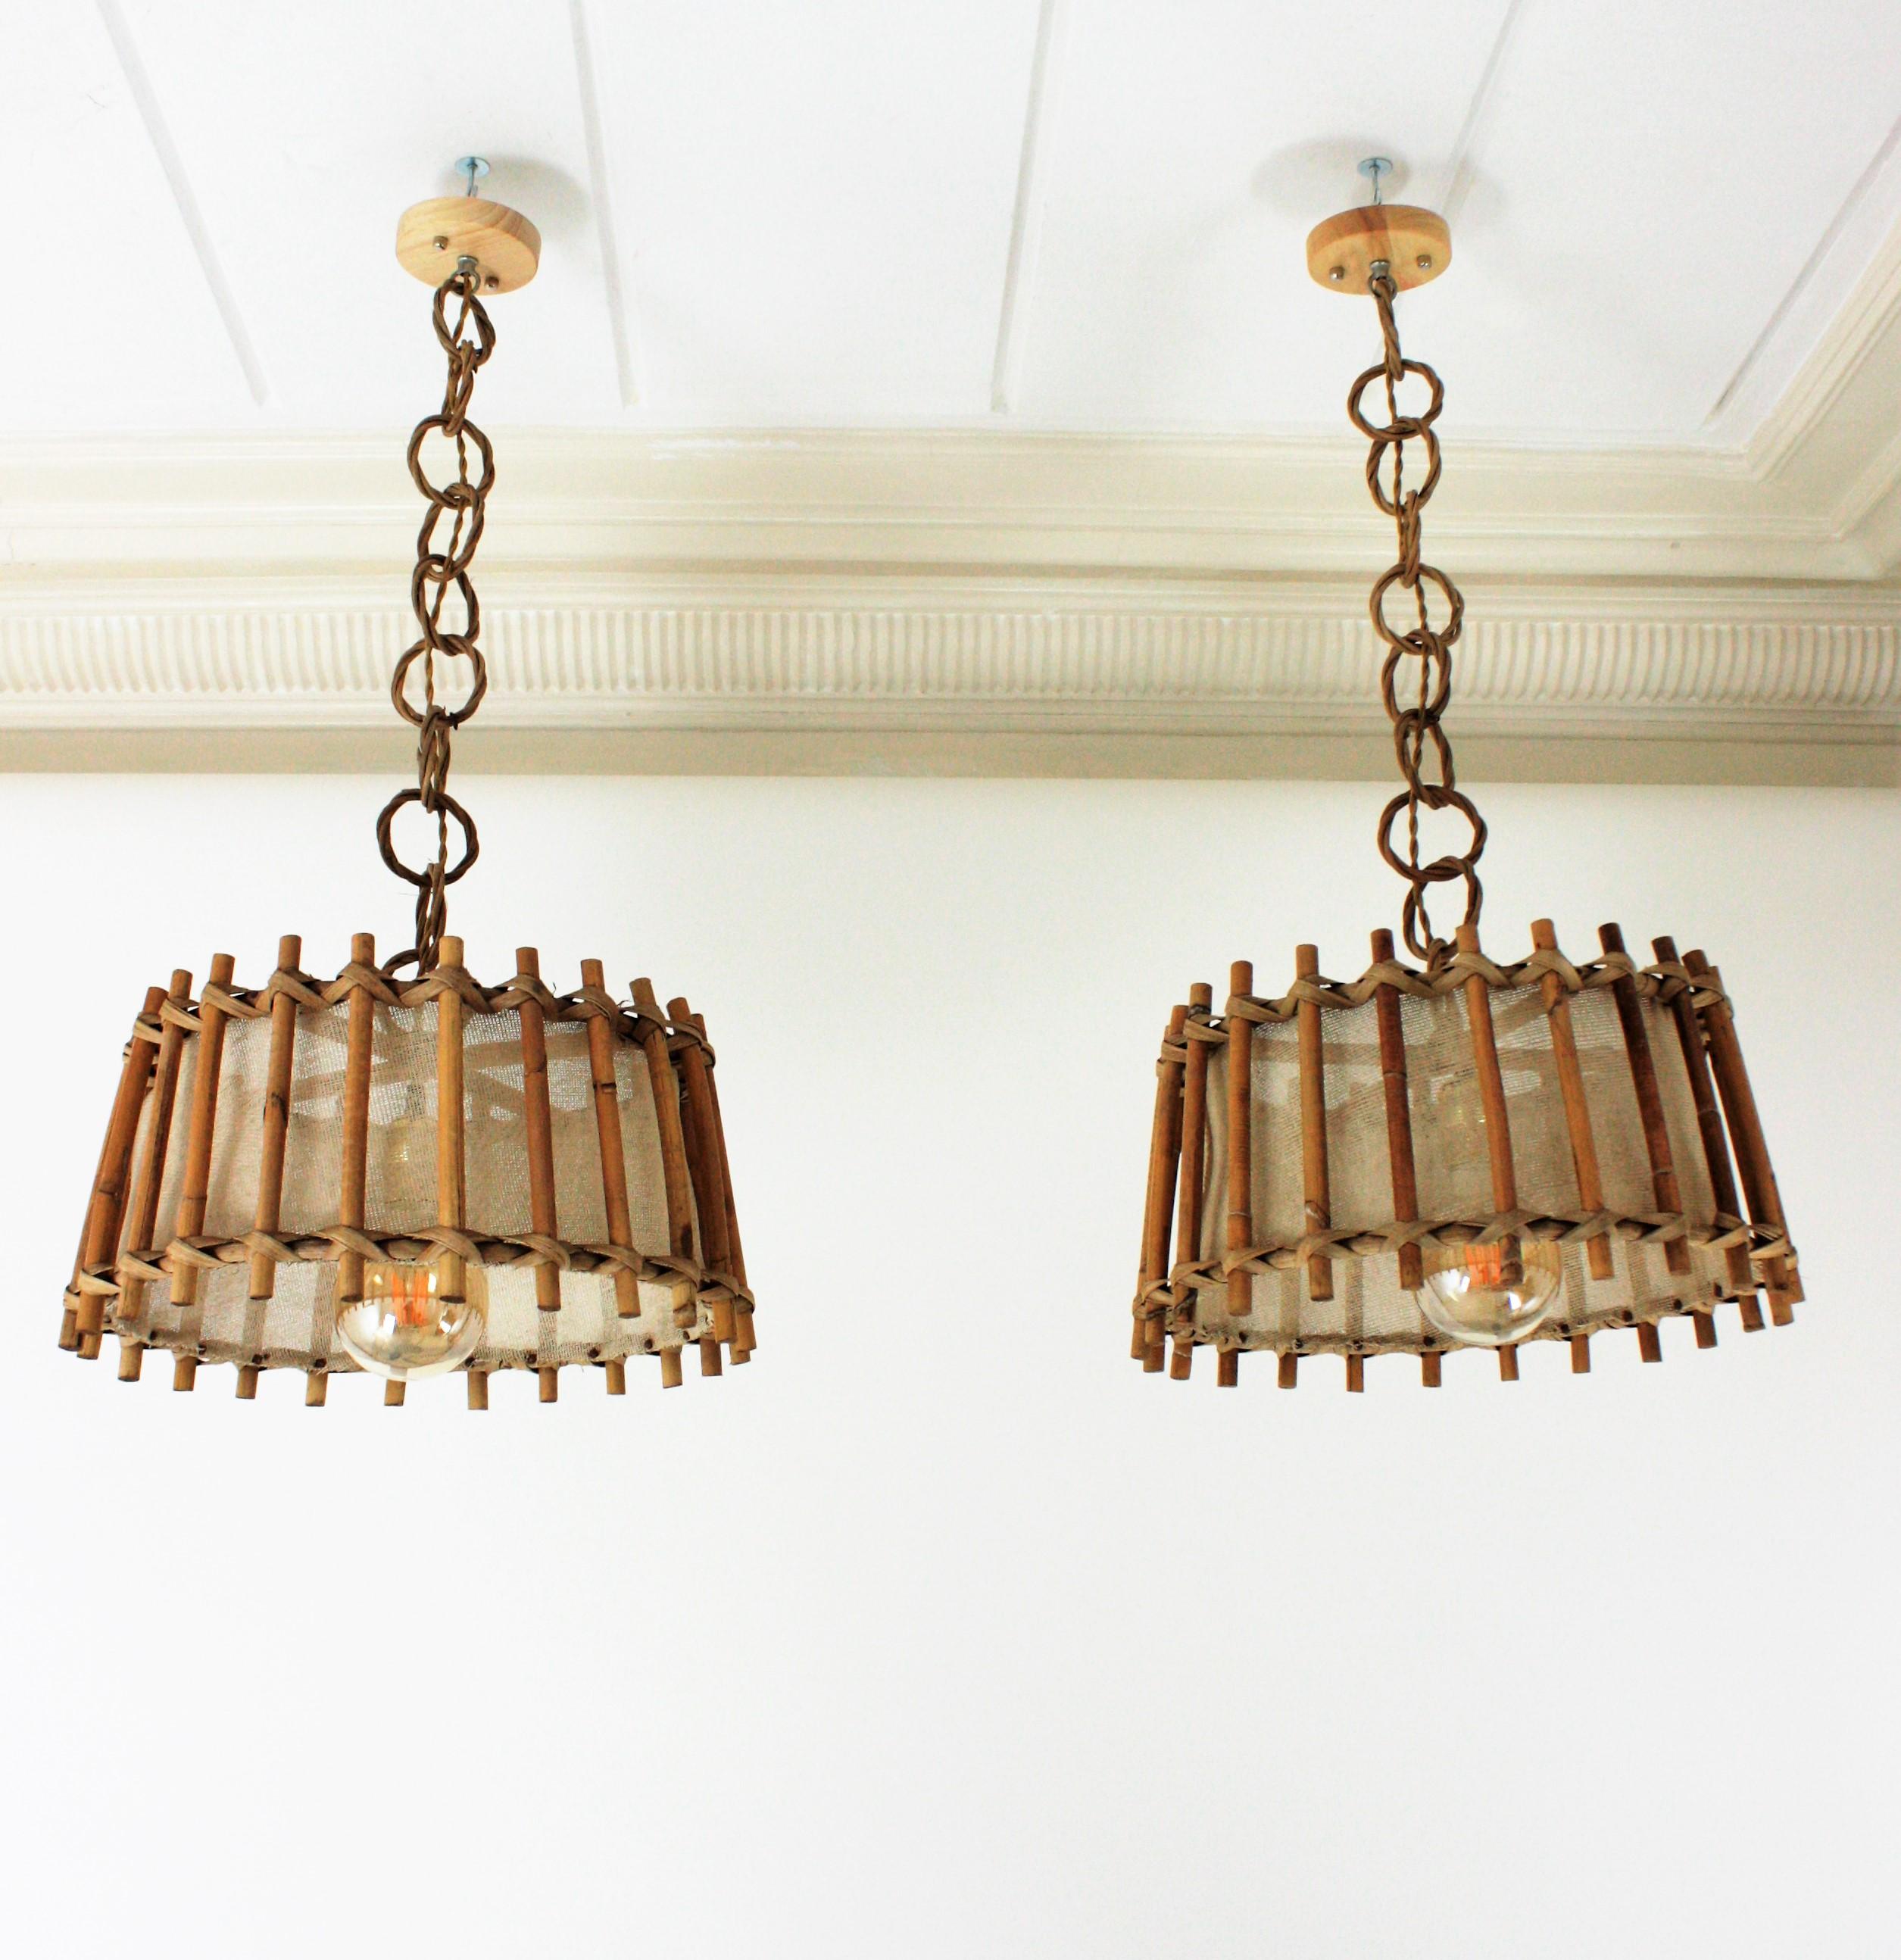 Beautiful pair of rattan and wicker round pendants with burlap sack interior shades. France, 1960s
These suspension lamps or lanterns feature an slightly conical round lampshade made of thick rattan canes. The interior part is upholstered with